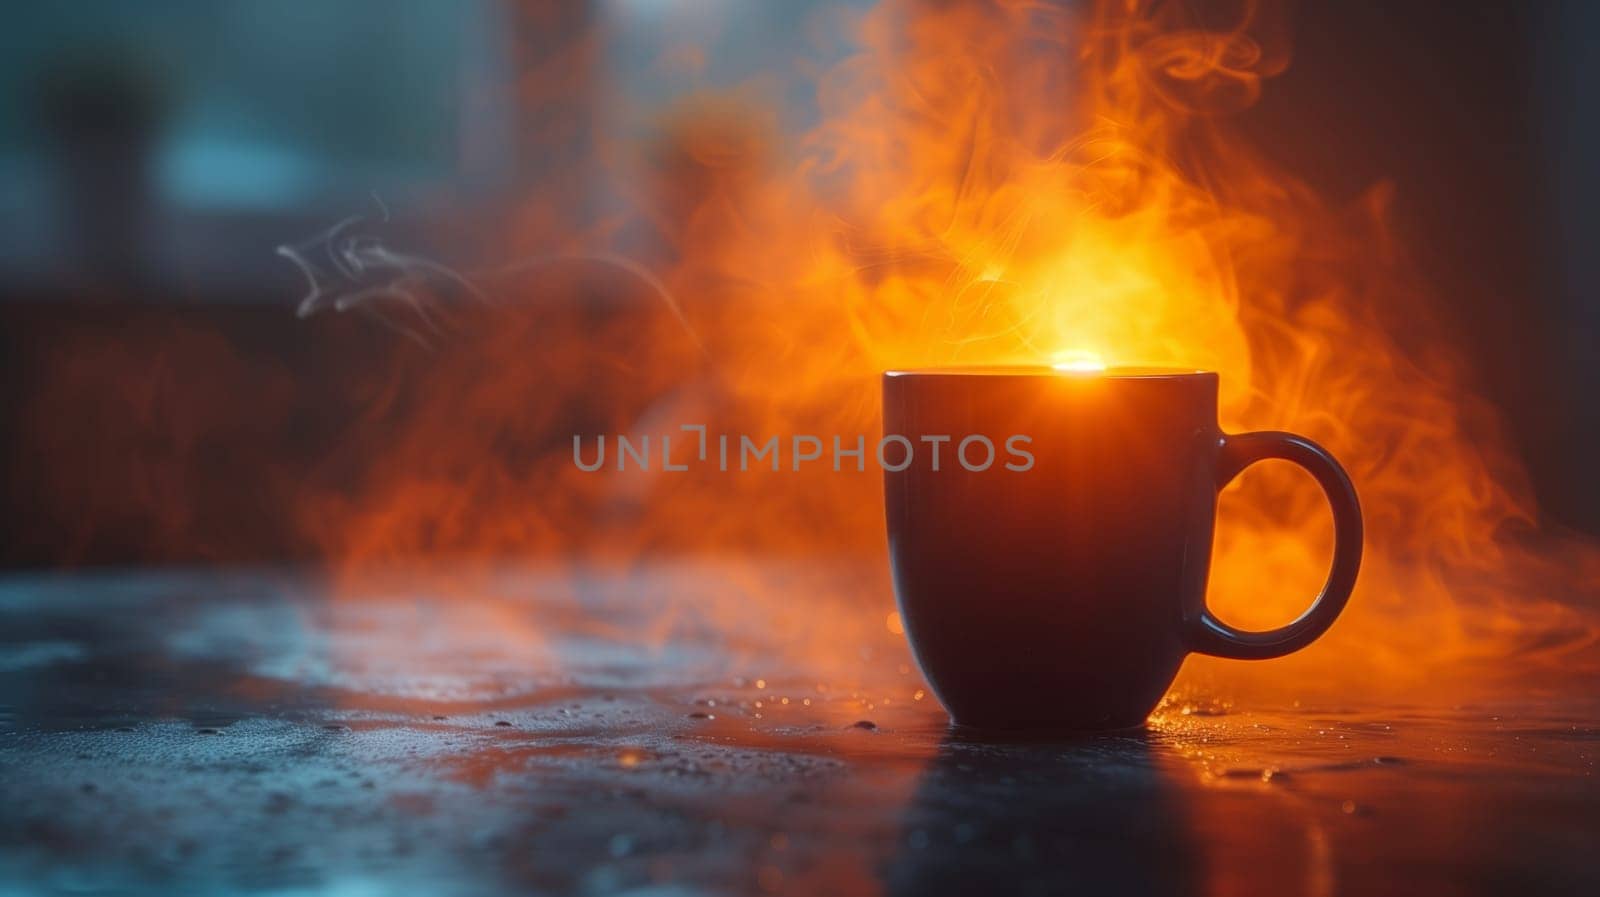 A coffee cup with flames emanating from it sits on a table, surrounded by other tableware. The heat from the flames warms the drink inside the cup